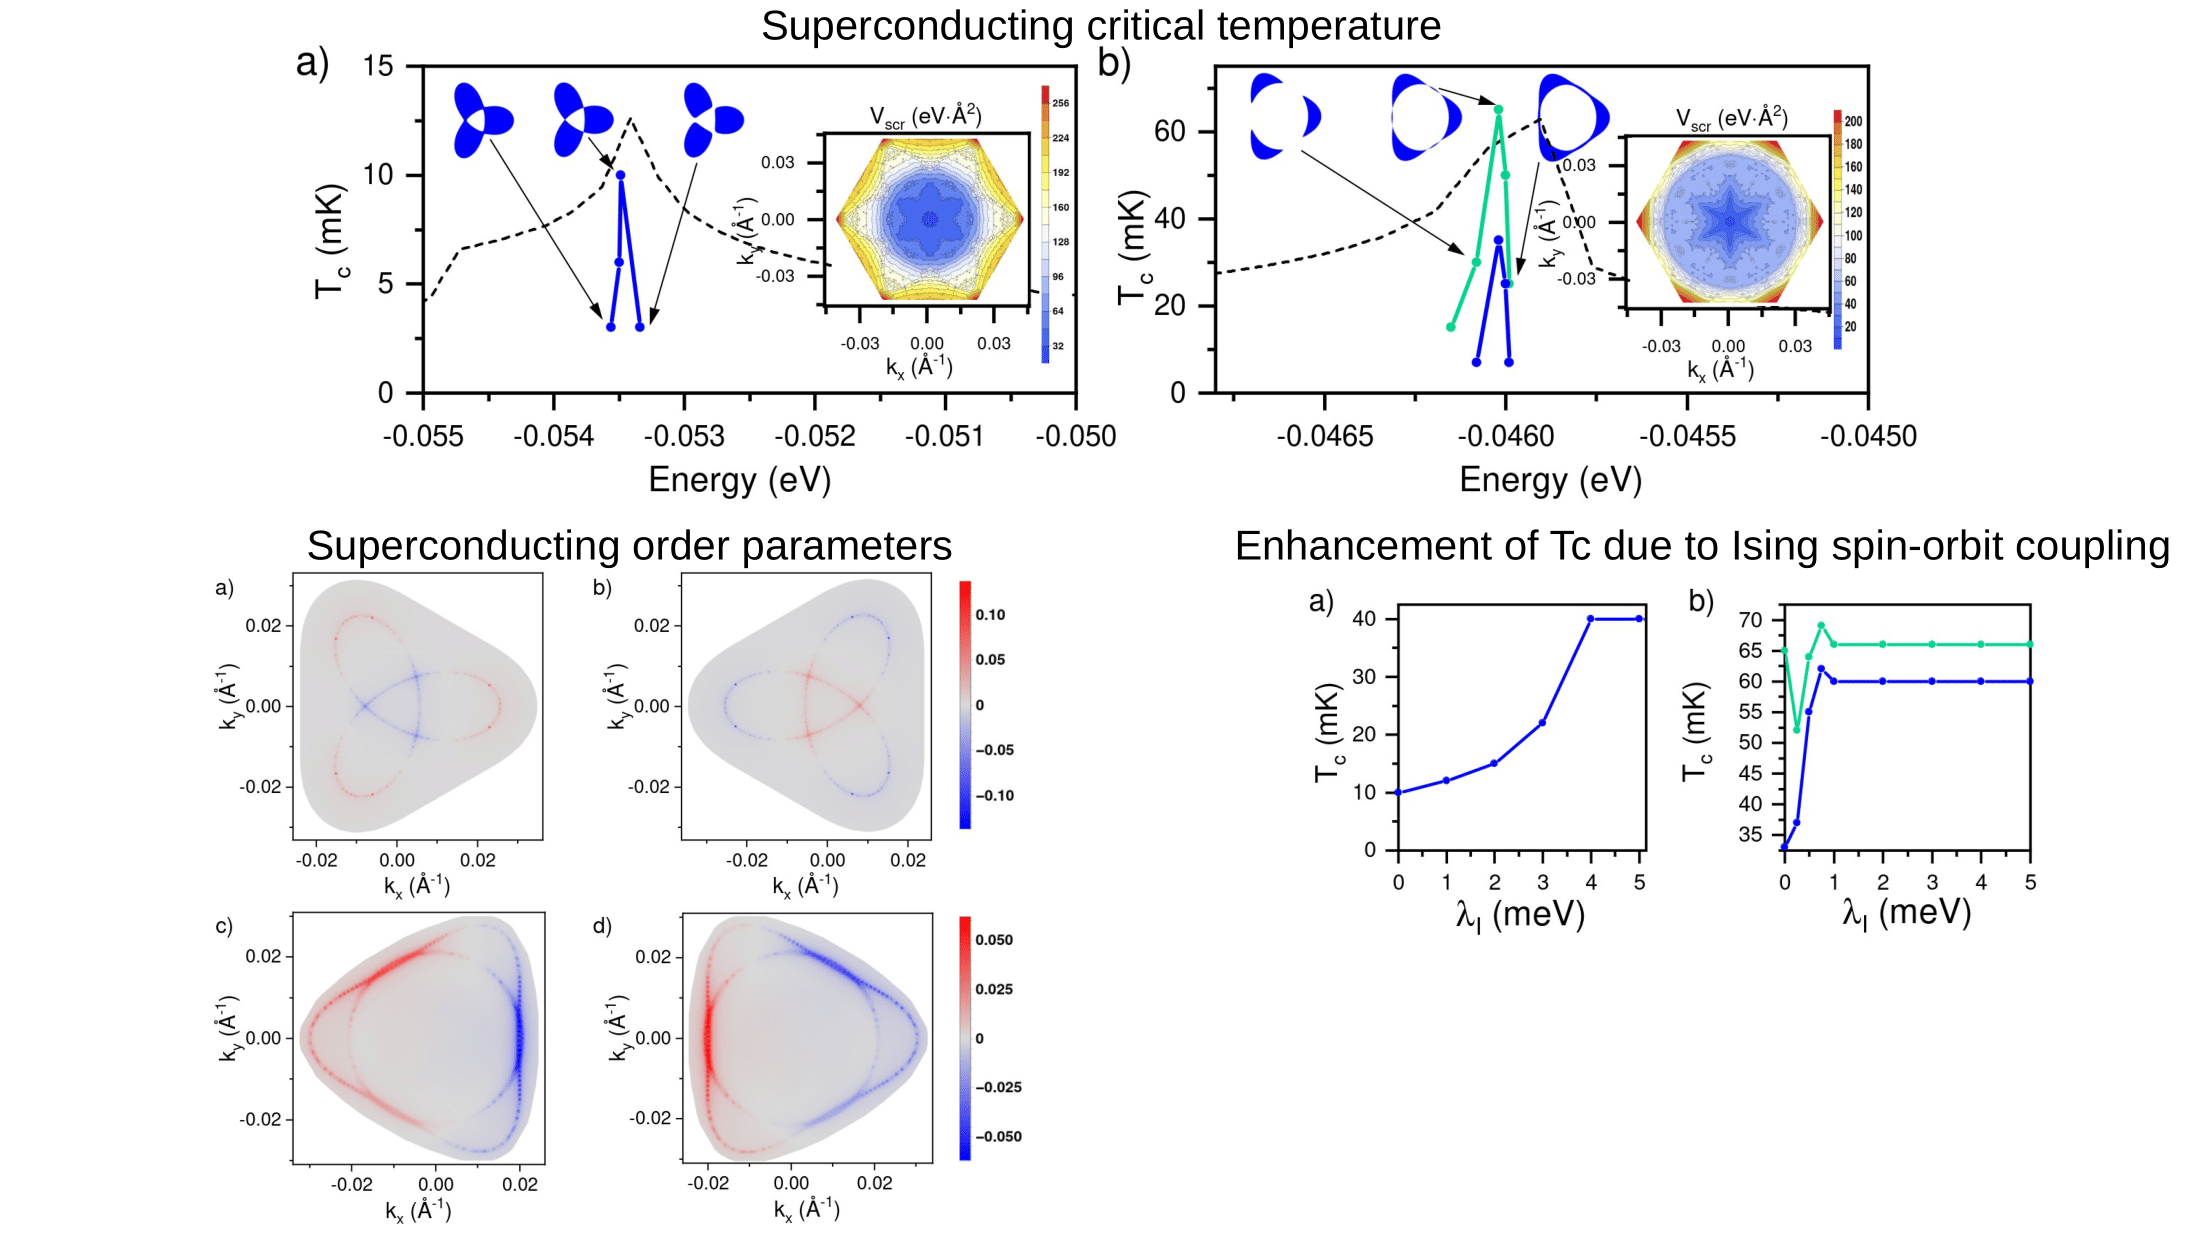 Superconductivity from electronic interactions and spin-orbit enhancement in bilayer and trilayer graphene